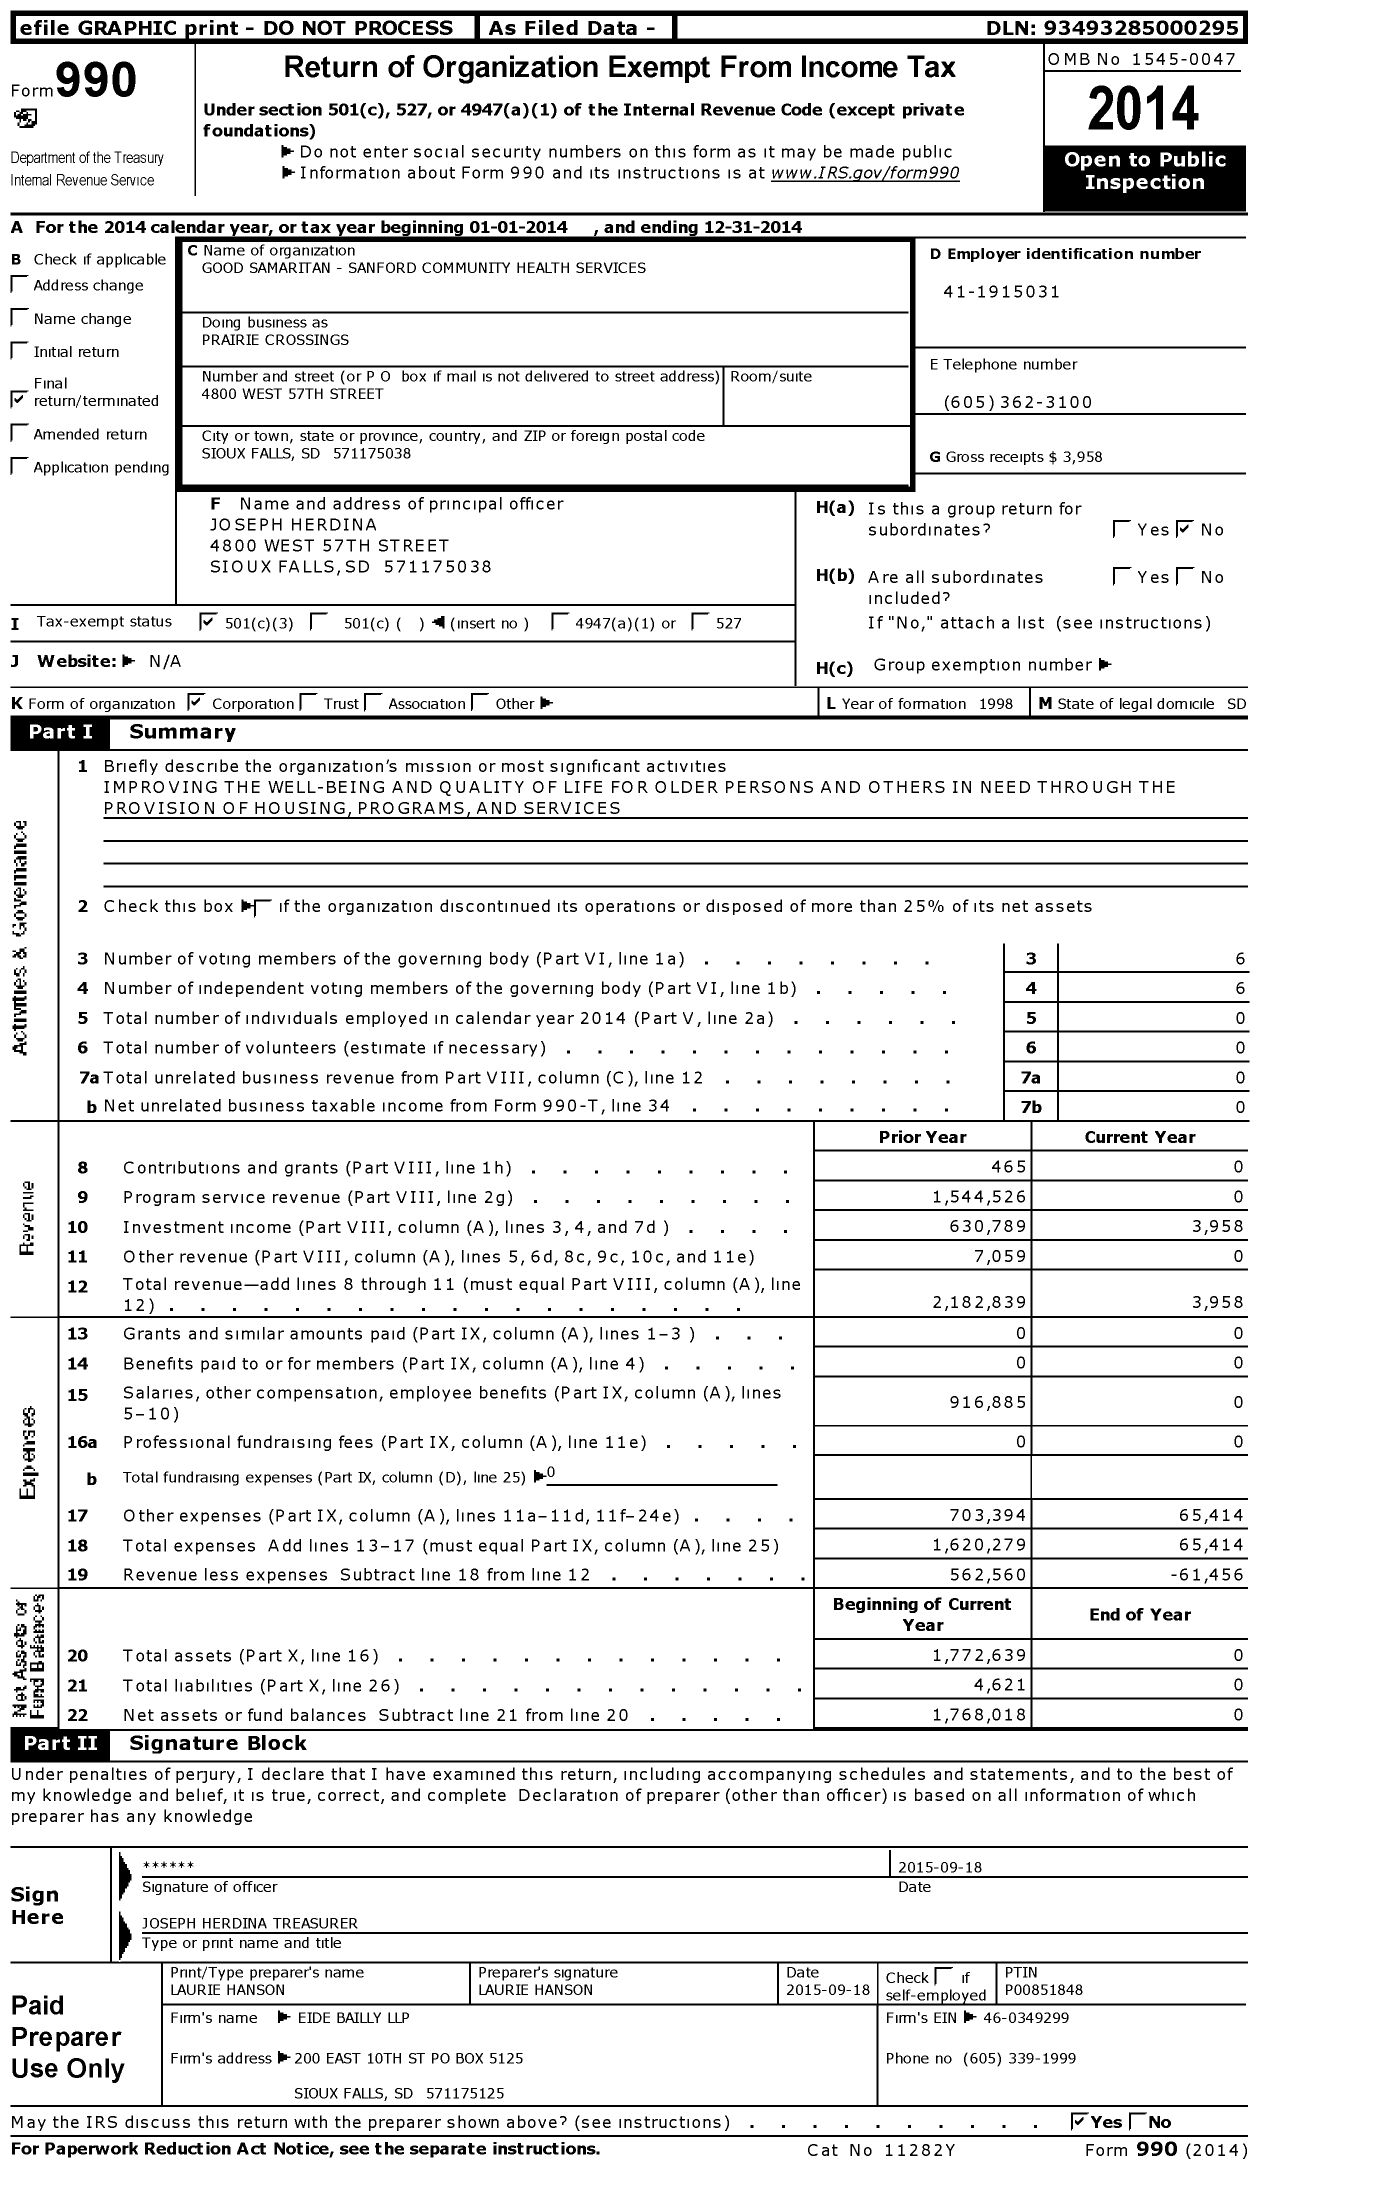 Image of first page of 2014 Form 990 for Good Samaritan - Sanford Community Health Services